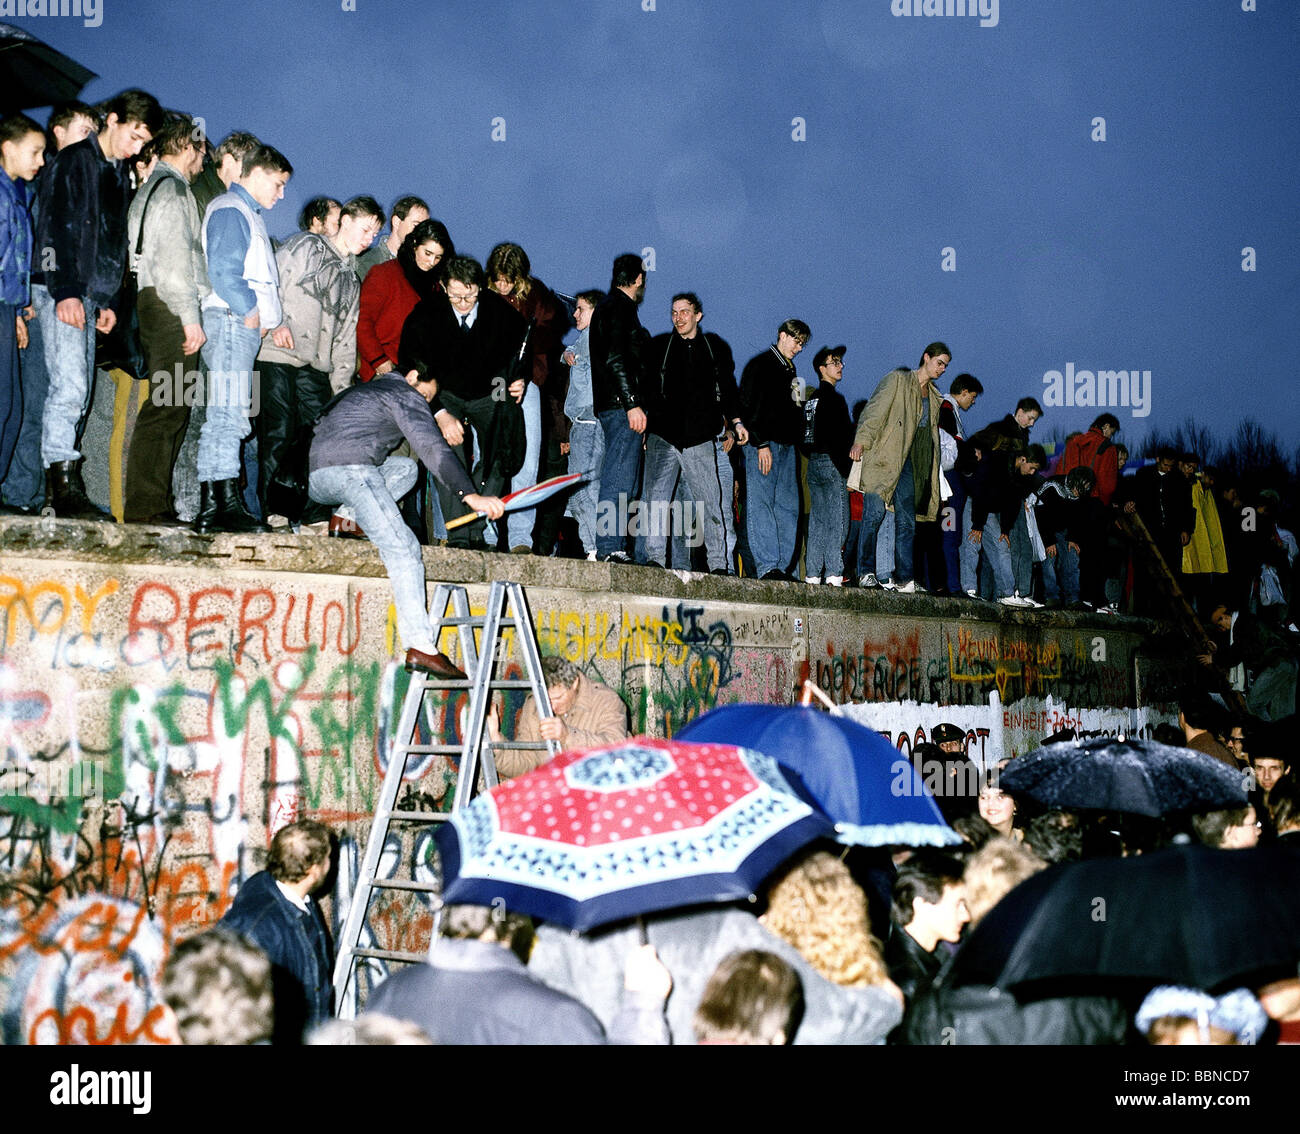 geography / travel, Germany, Fall of the Berlin Wall, people standing on the Wall, Berlin, 9.11.1989, historic, historical, 20th century, 1980s, 80s, opening, down, November'89, November 89, East Germany, East-Germany, German border, Stock Photo